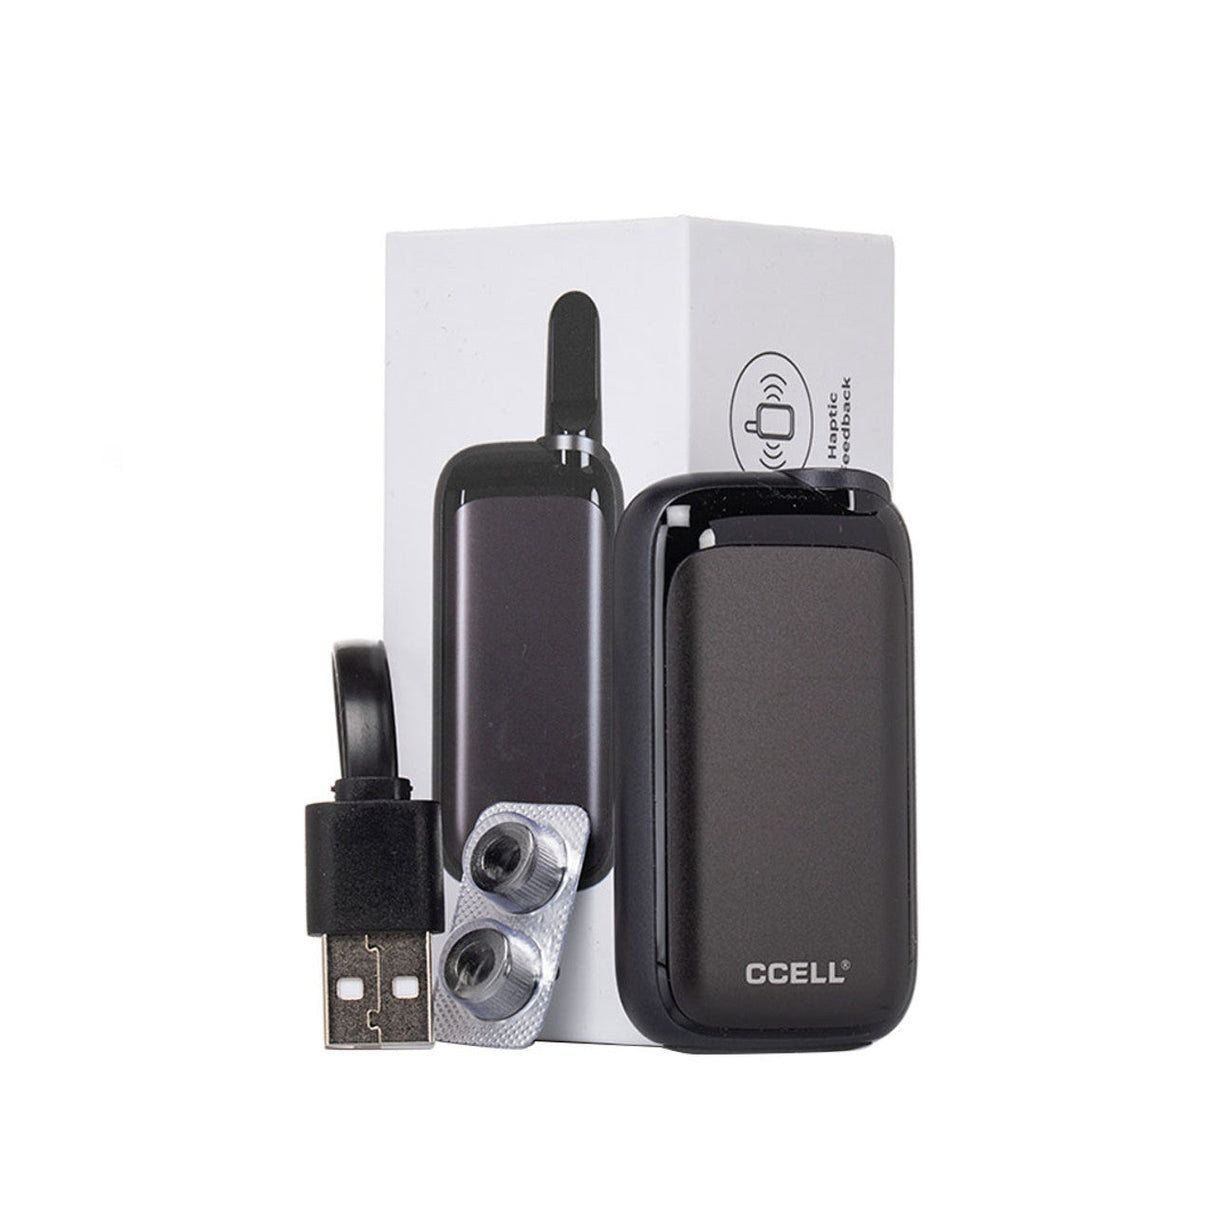 CCell Rizo Variable Voltage Cartridge Vaporizer 300mAh in Black with USB Charger and Packaging